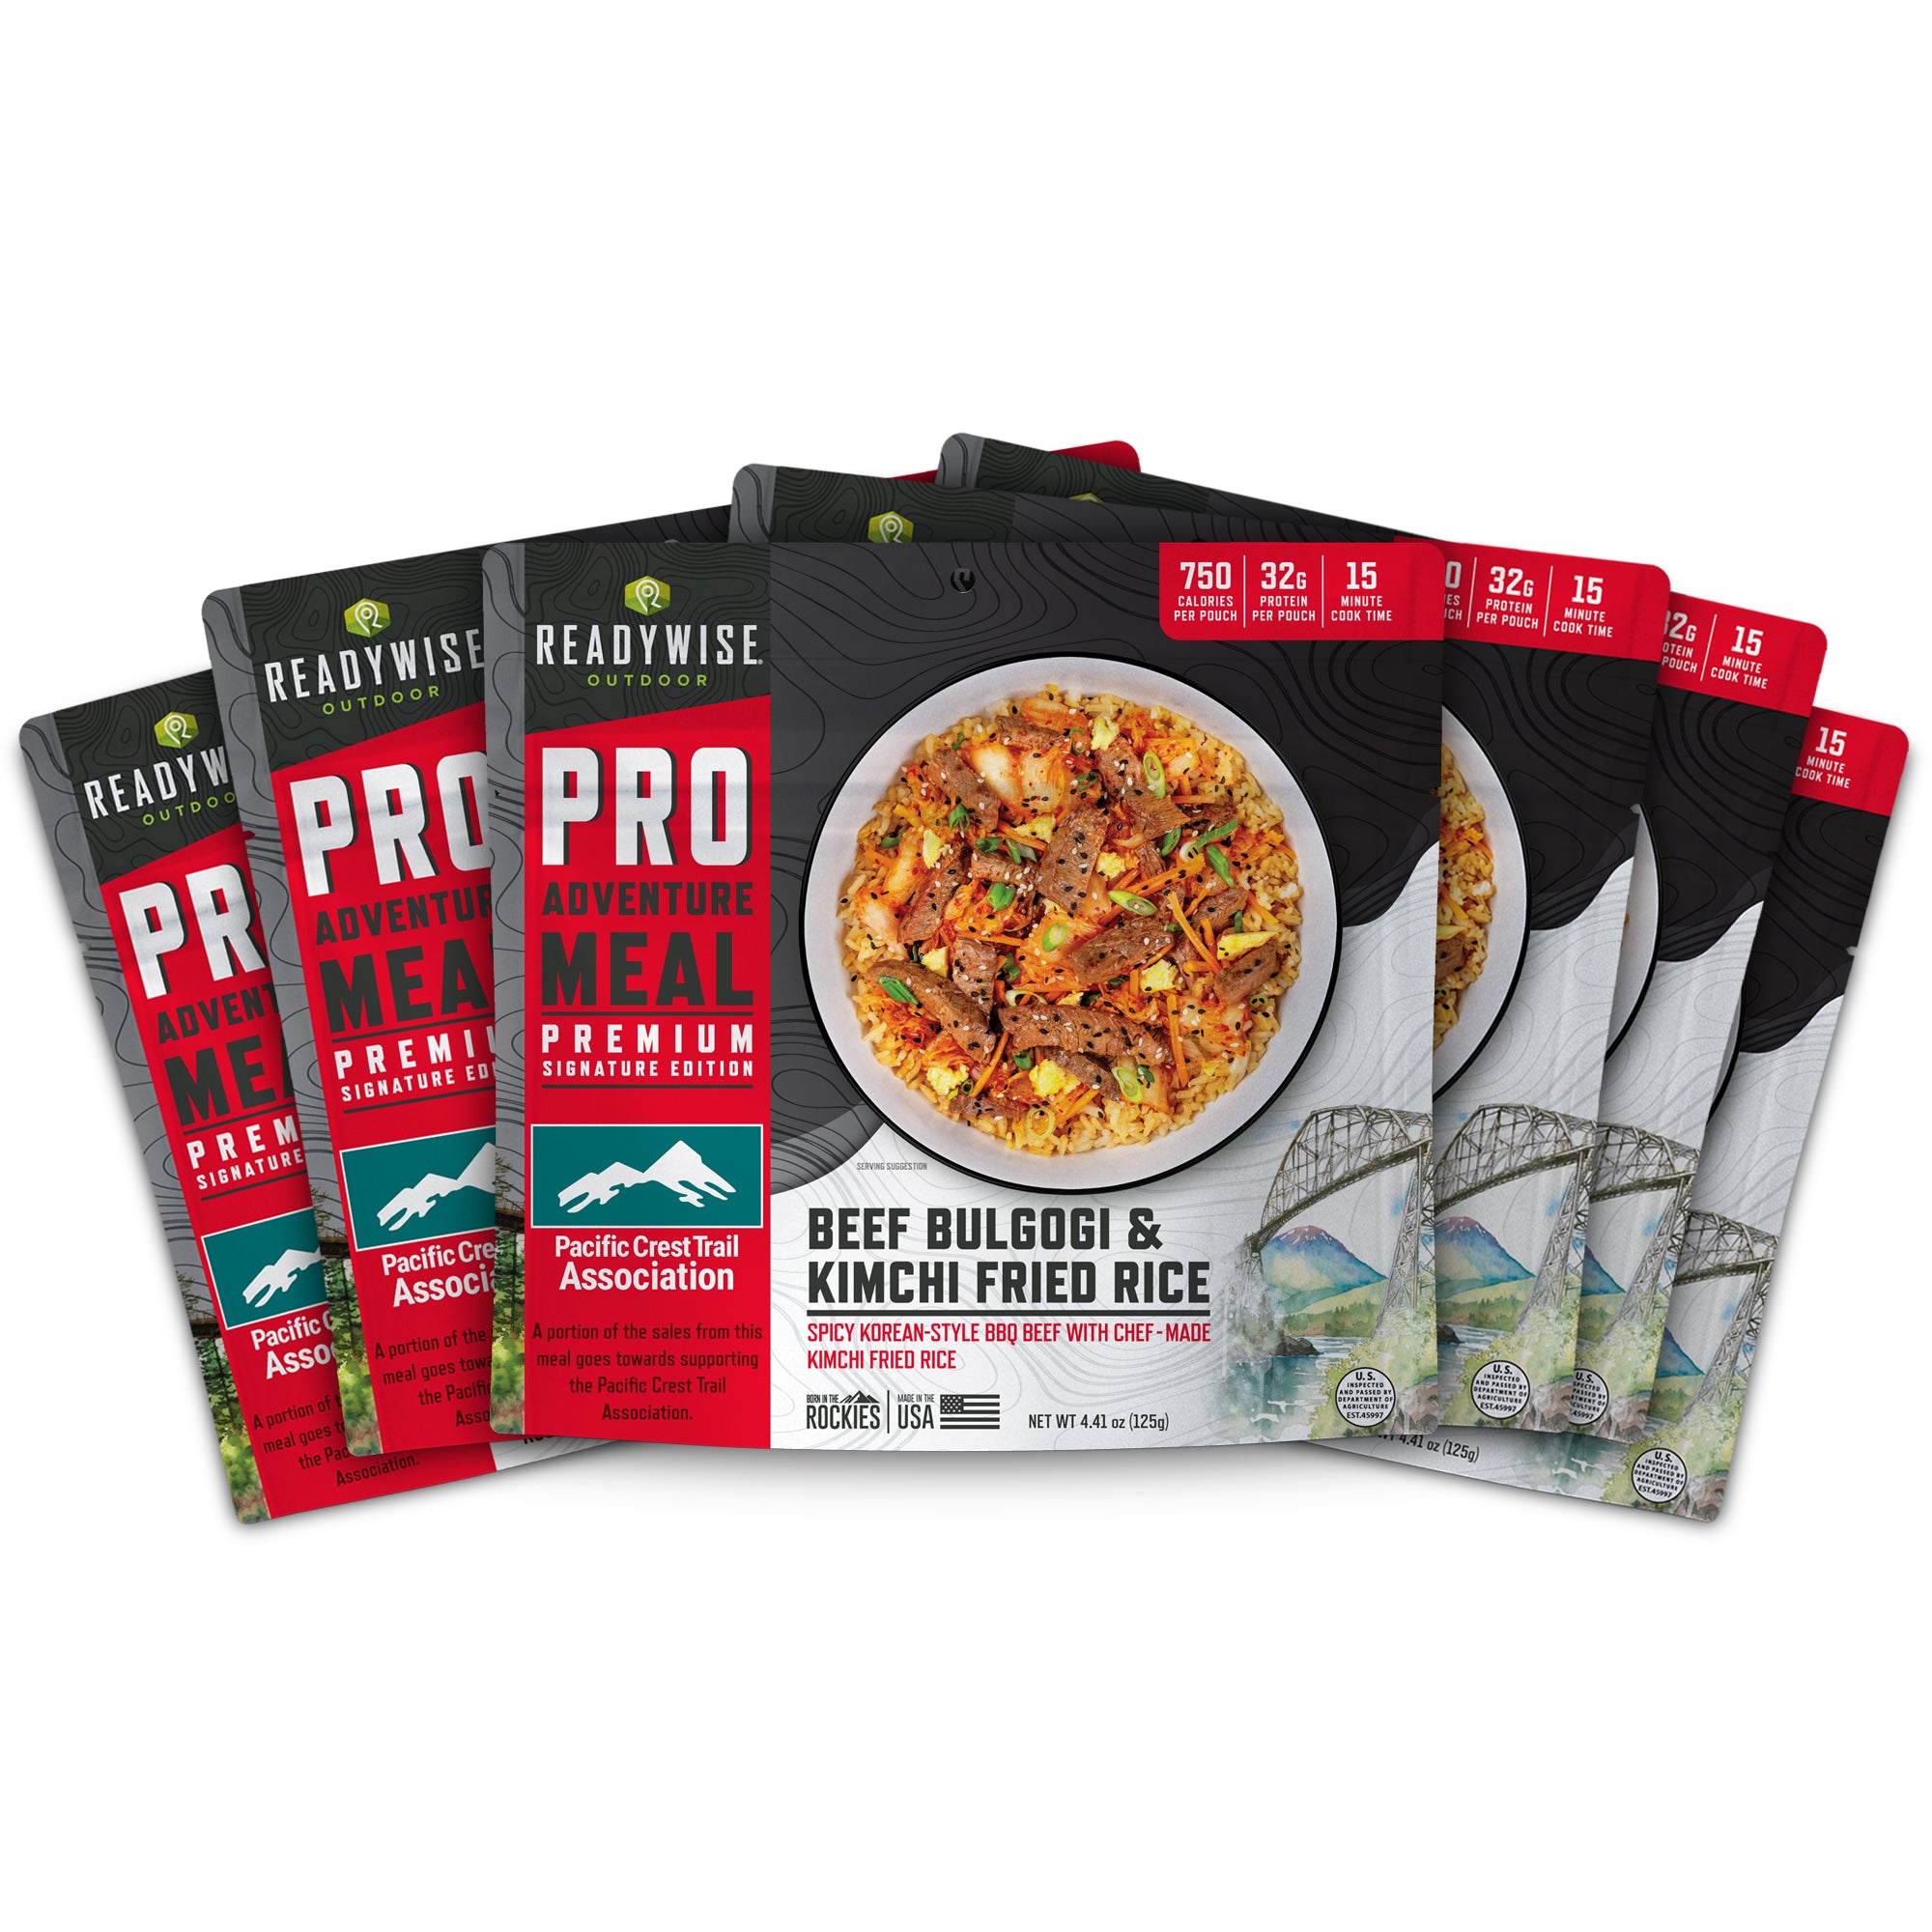 6 CT ReadyWise Emergency Food Pro Adventure Meal Beef Bulgogi and Kimchi Fried Rice